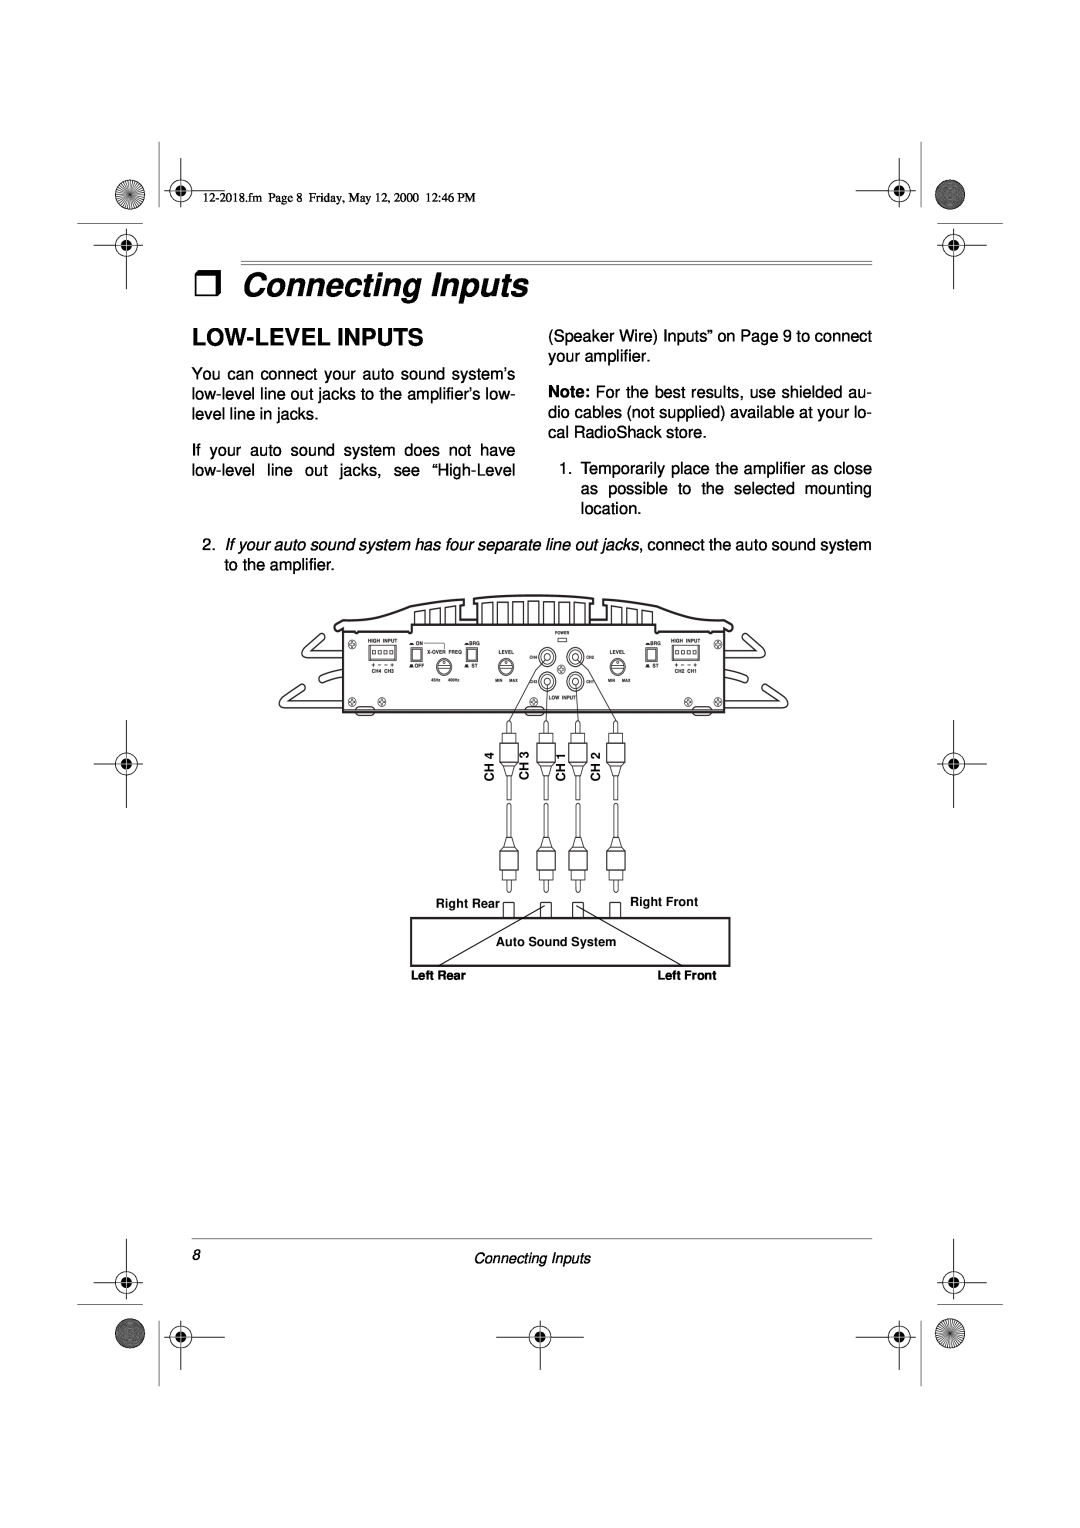 Radio Shack XL-400 owner manual ˆConnecting Inputs, Low-Levelinputs 